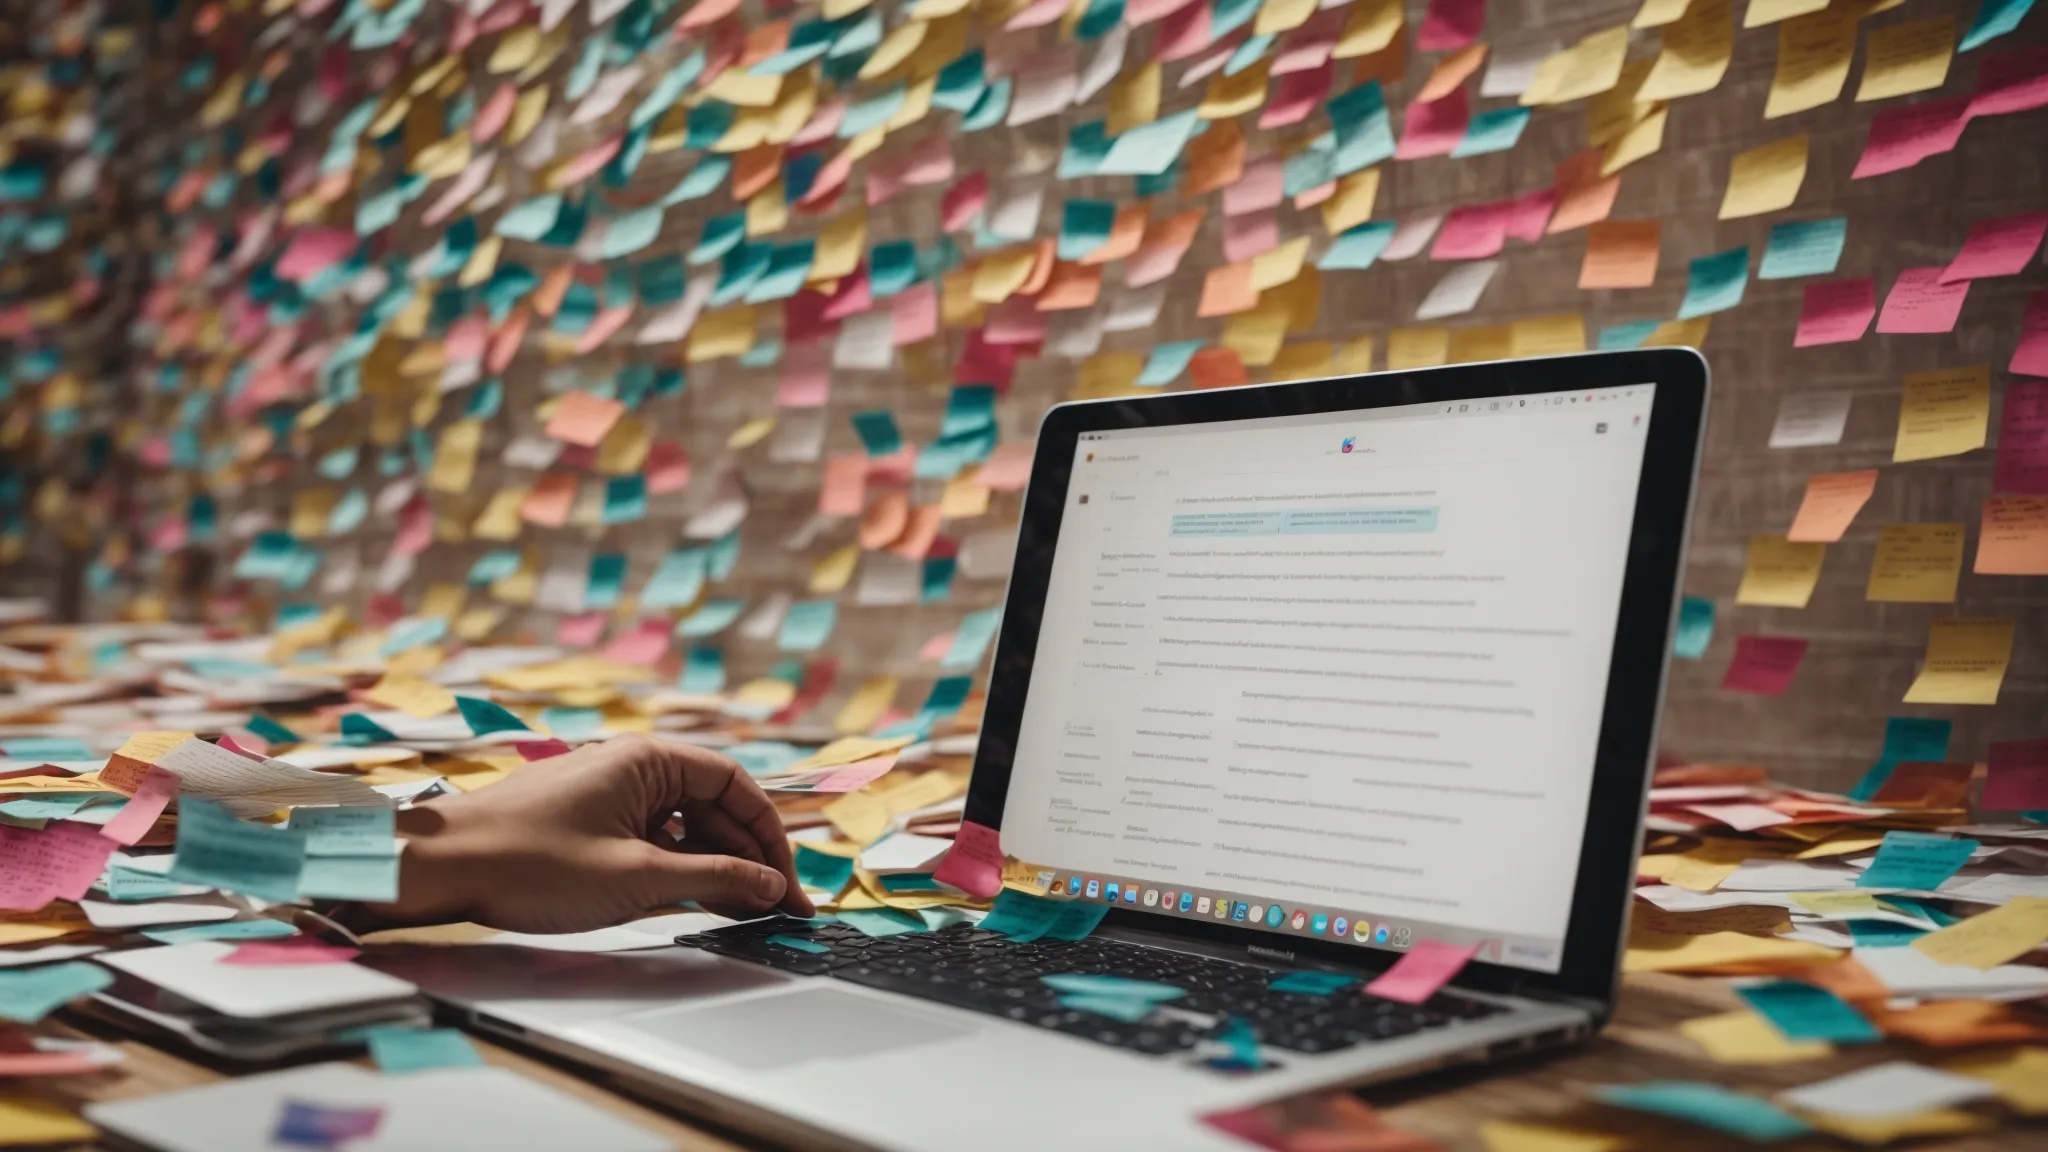 a person types on a laptop with a search engine on the screen, surrounded by notes and colorful sticky tabs.